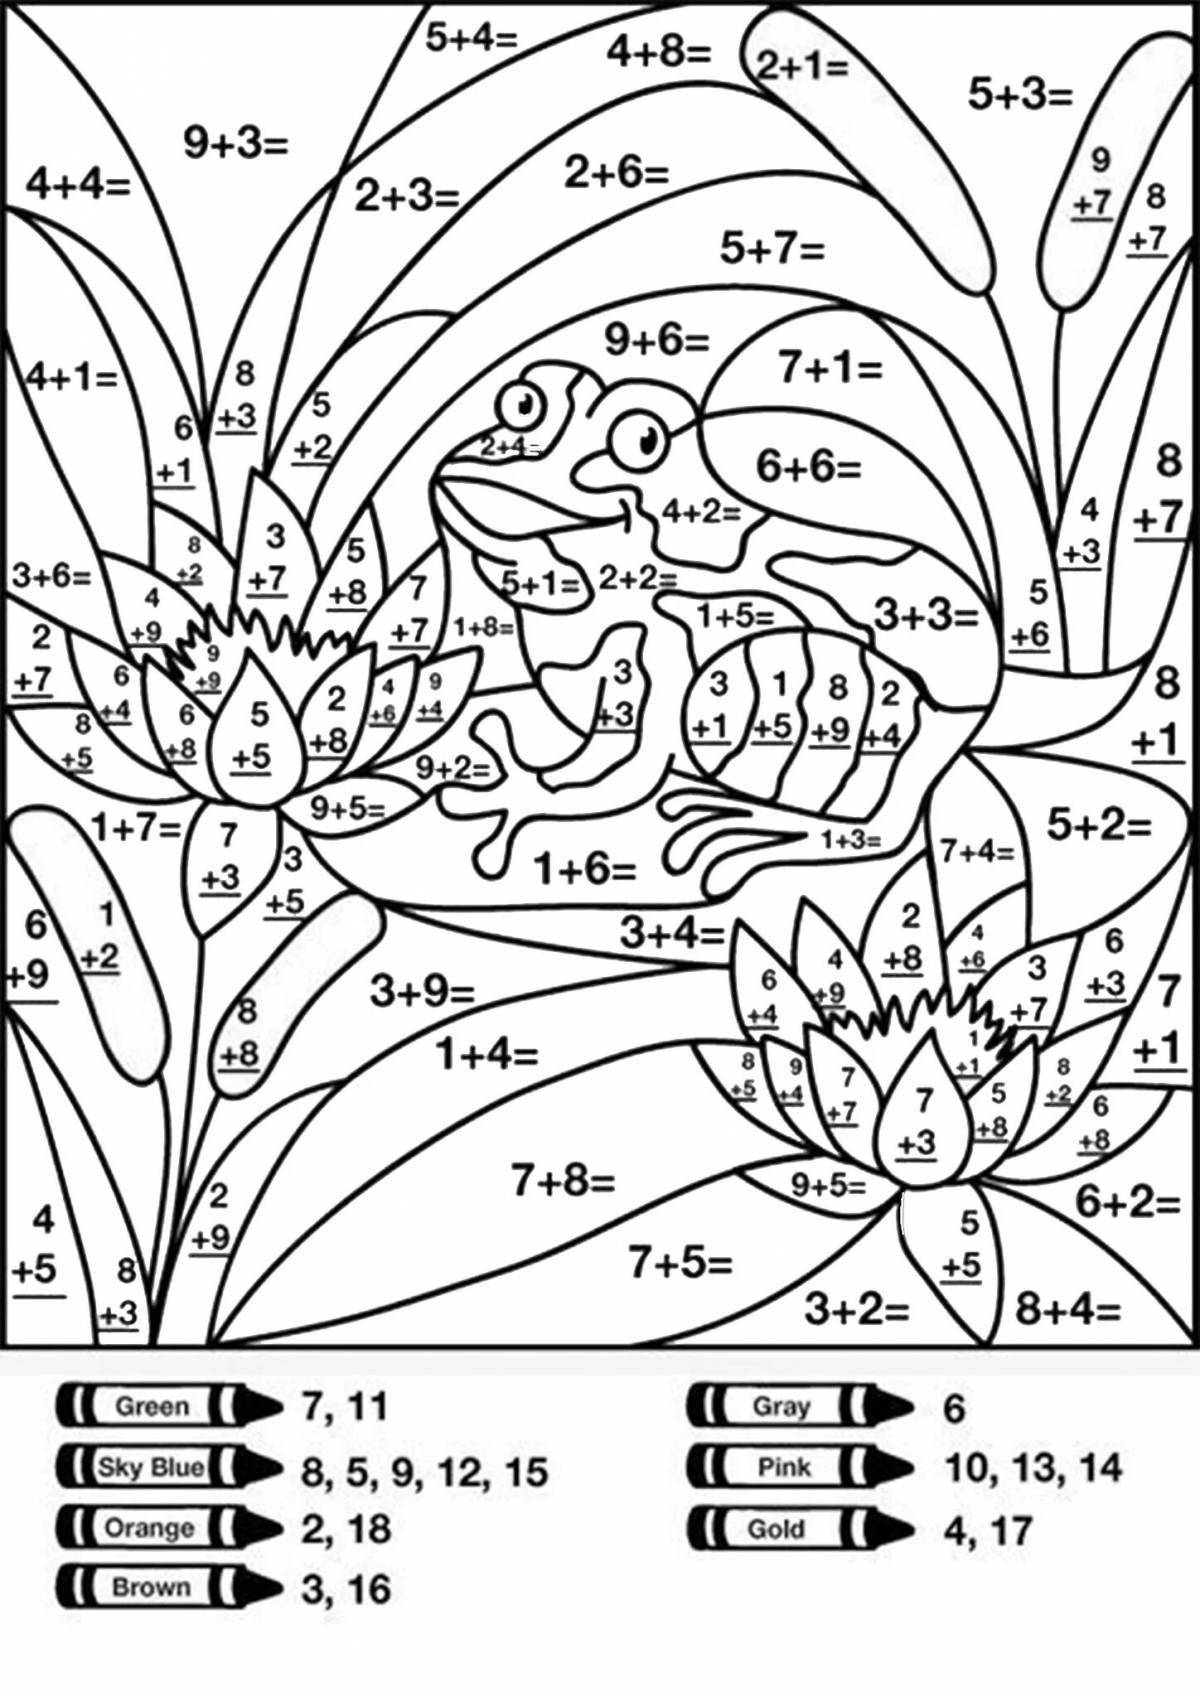 Coloring page amazing math, 2nd grade, 2nd quarter